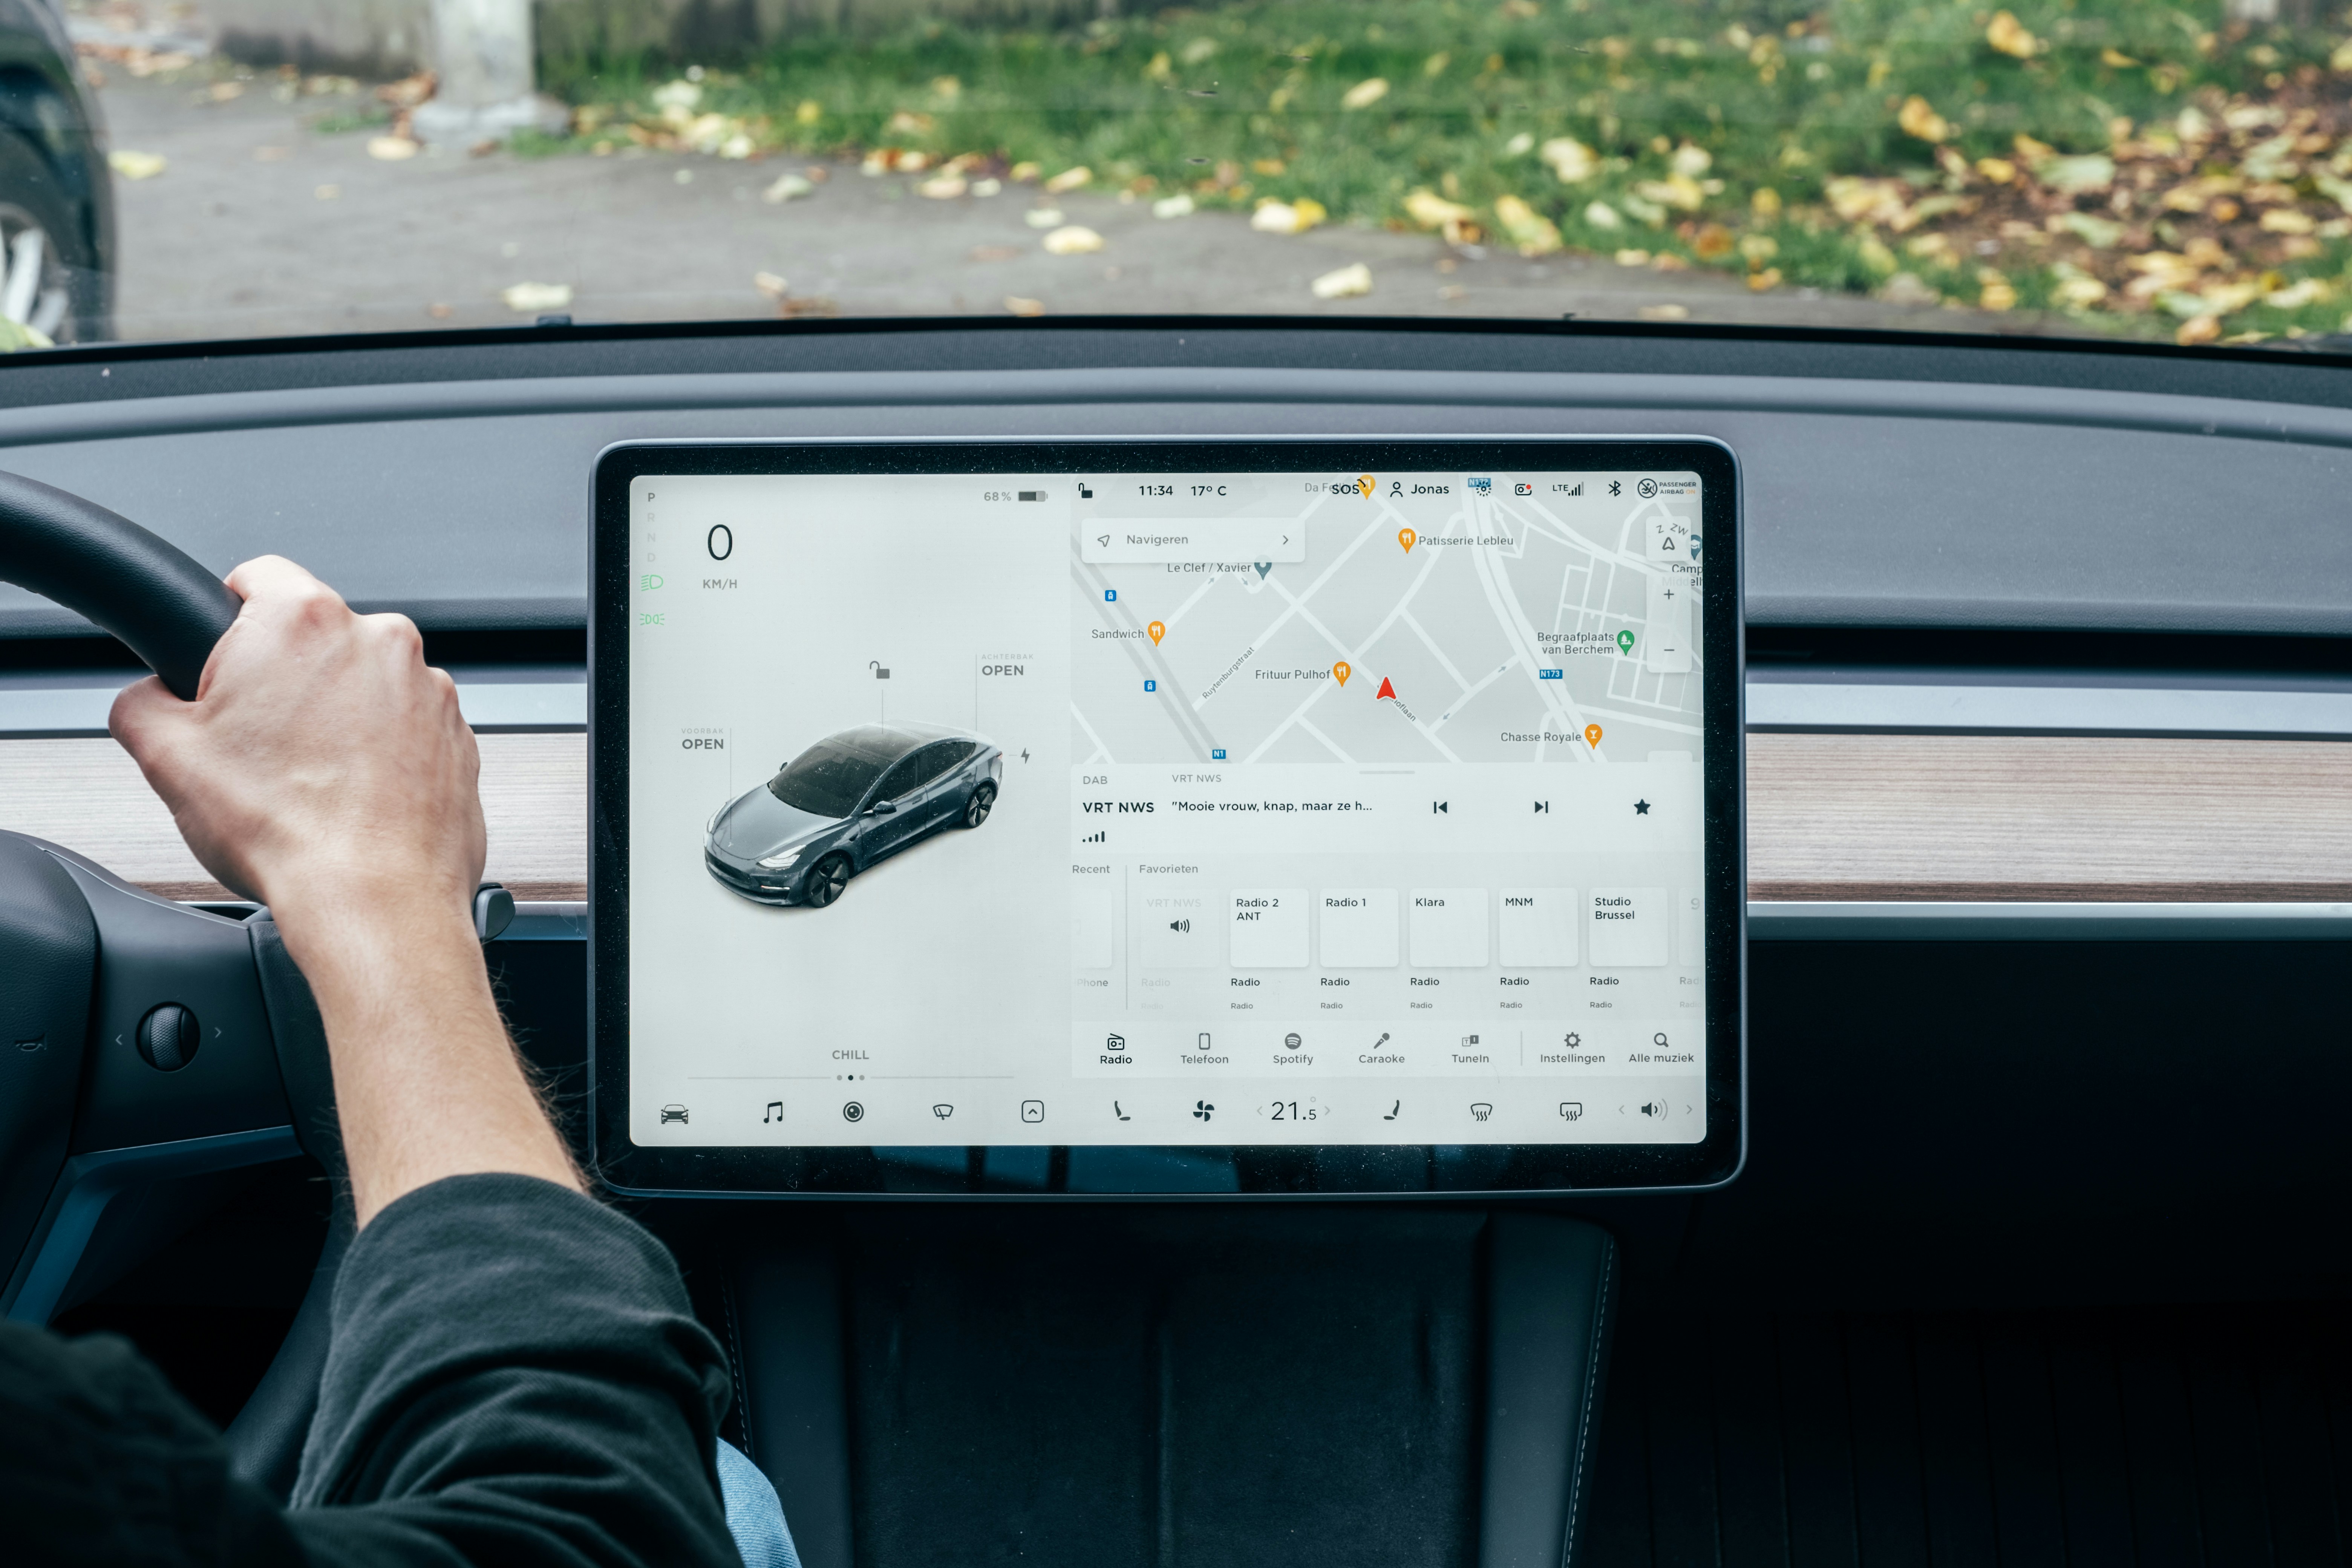 Interface of the Tesla model 3